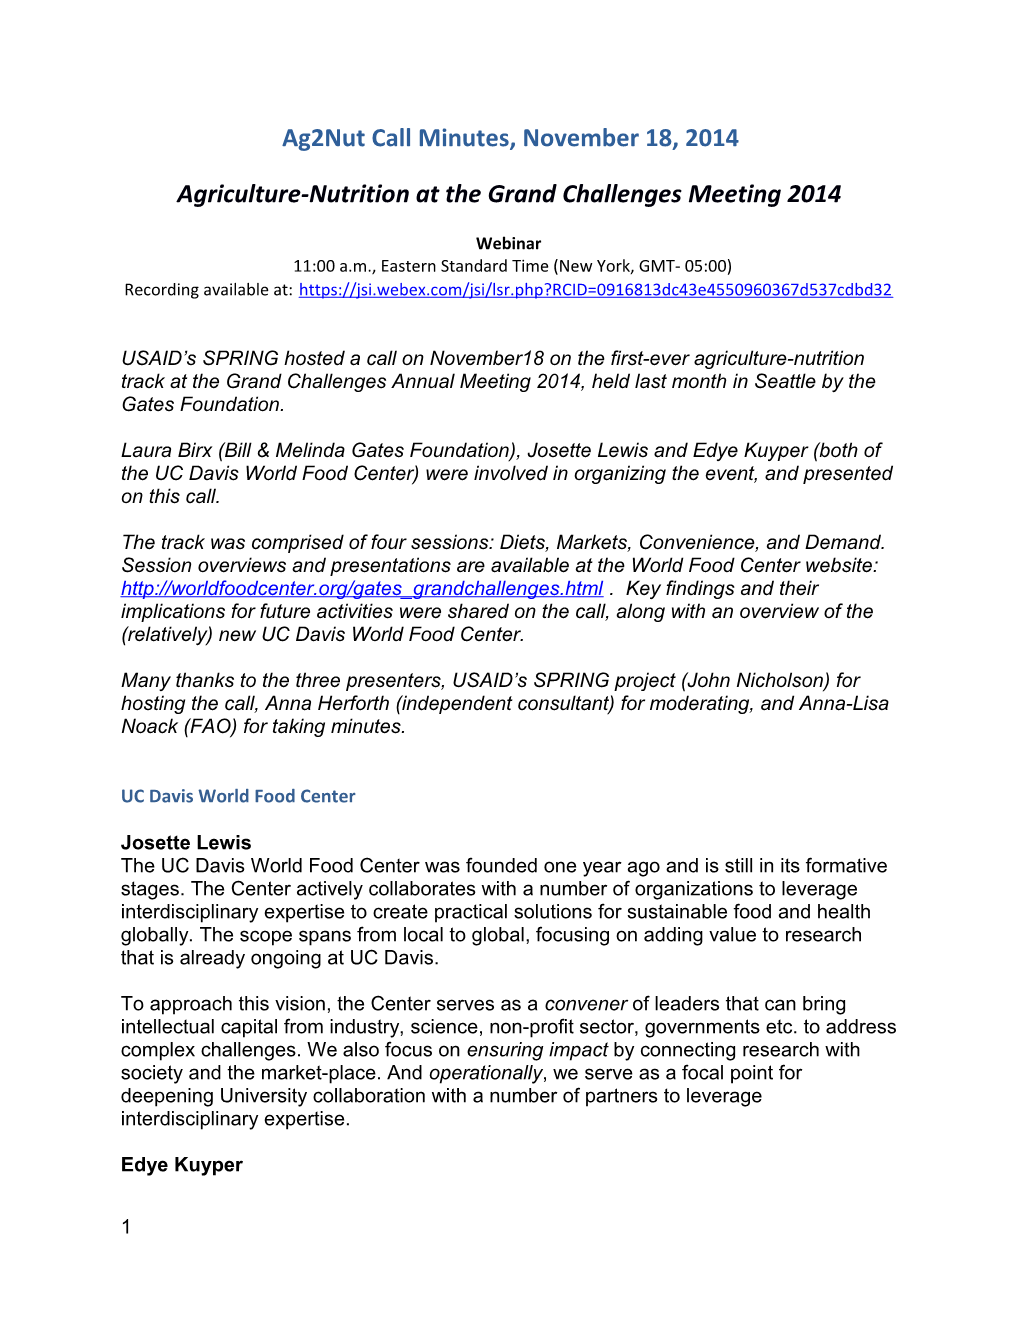 Agricultur E-Nutritio N at the Grand Challenges Meeting 2014